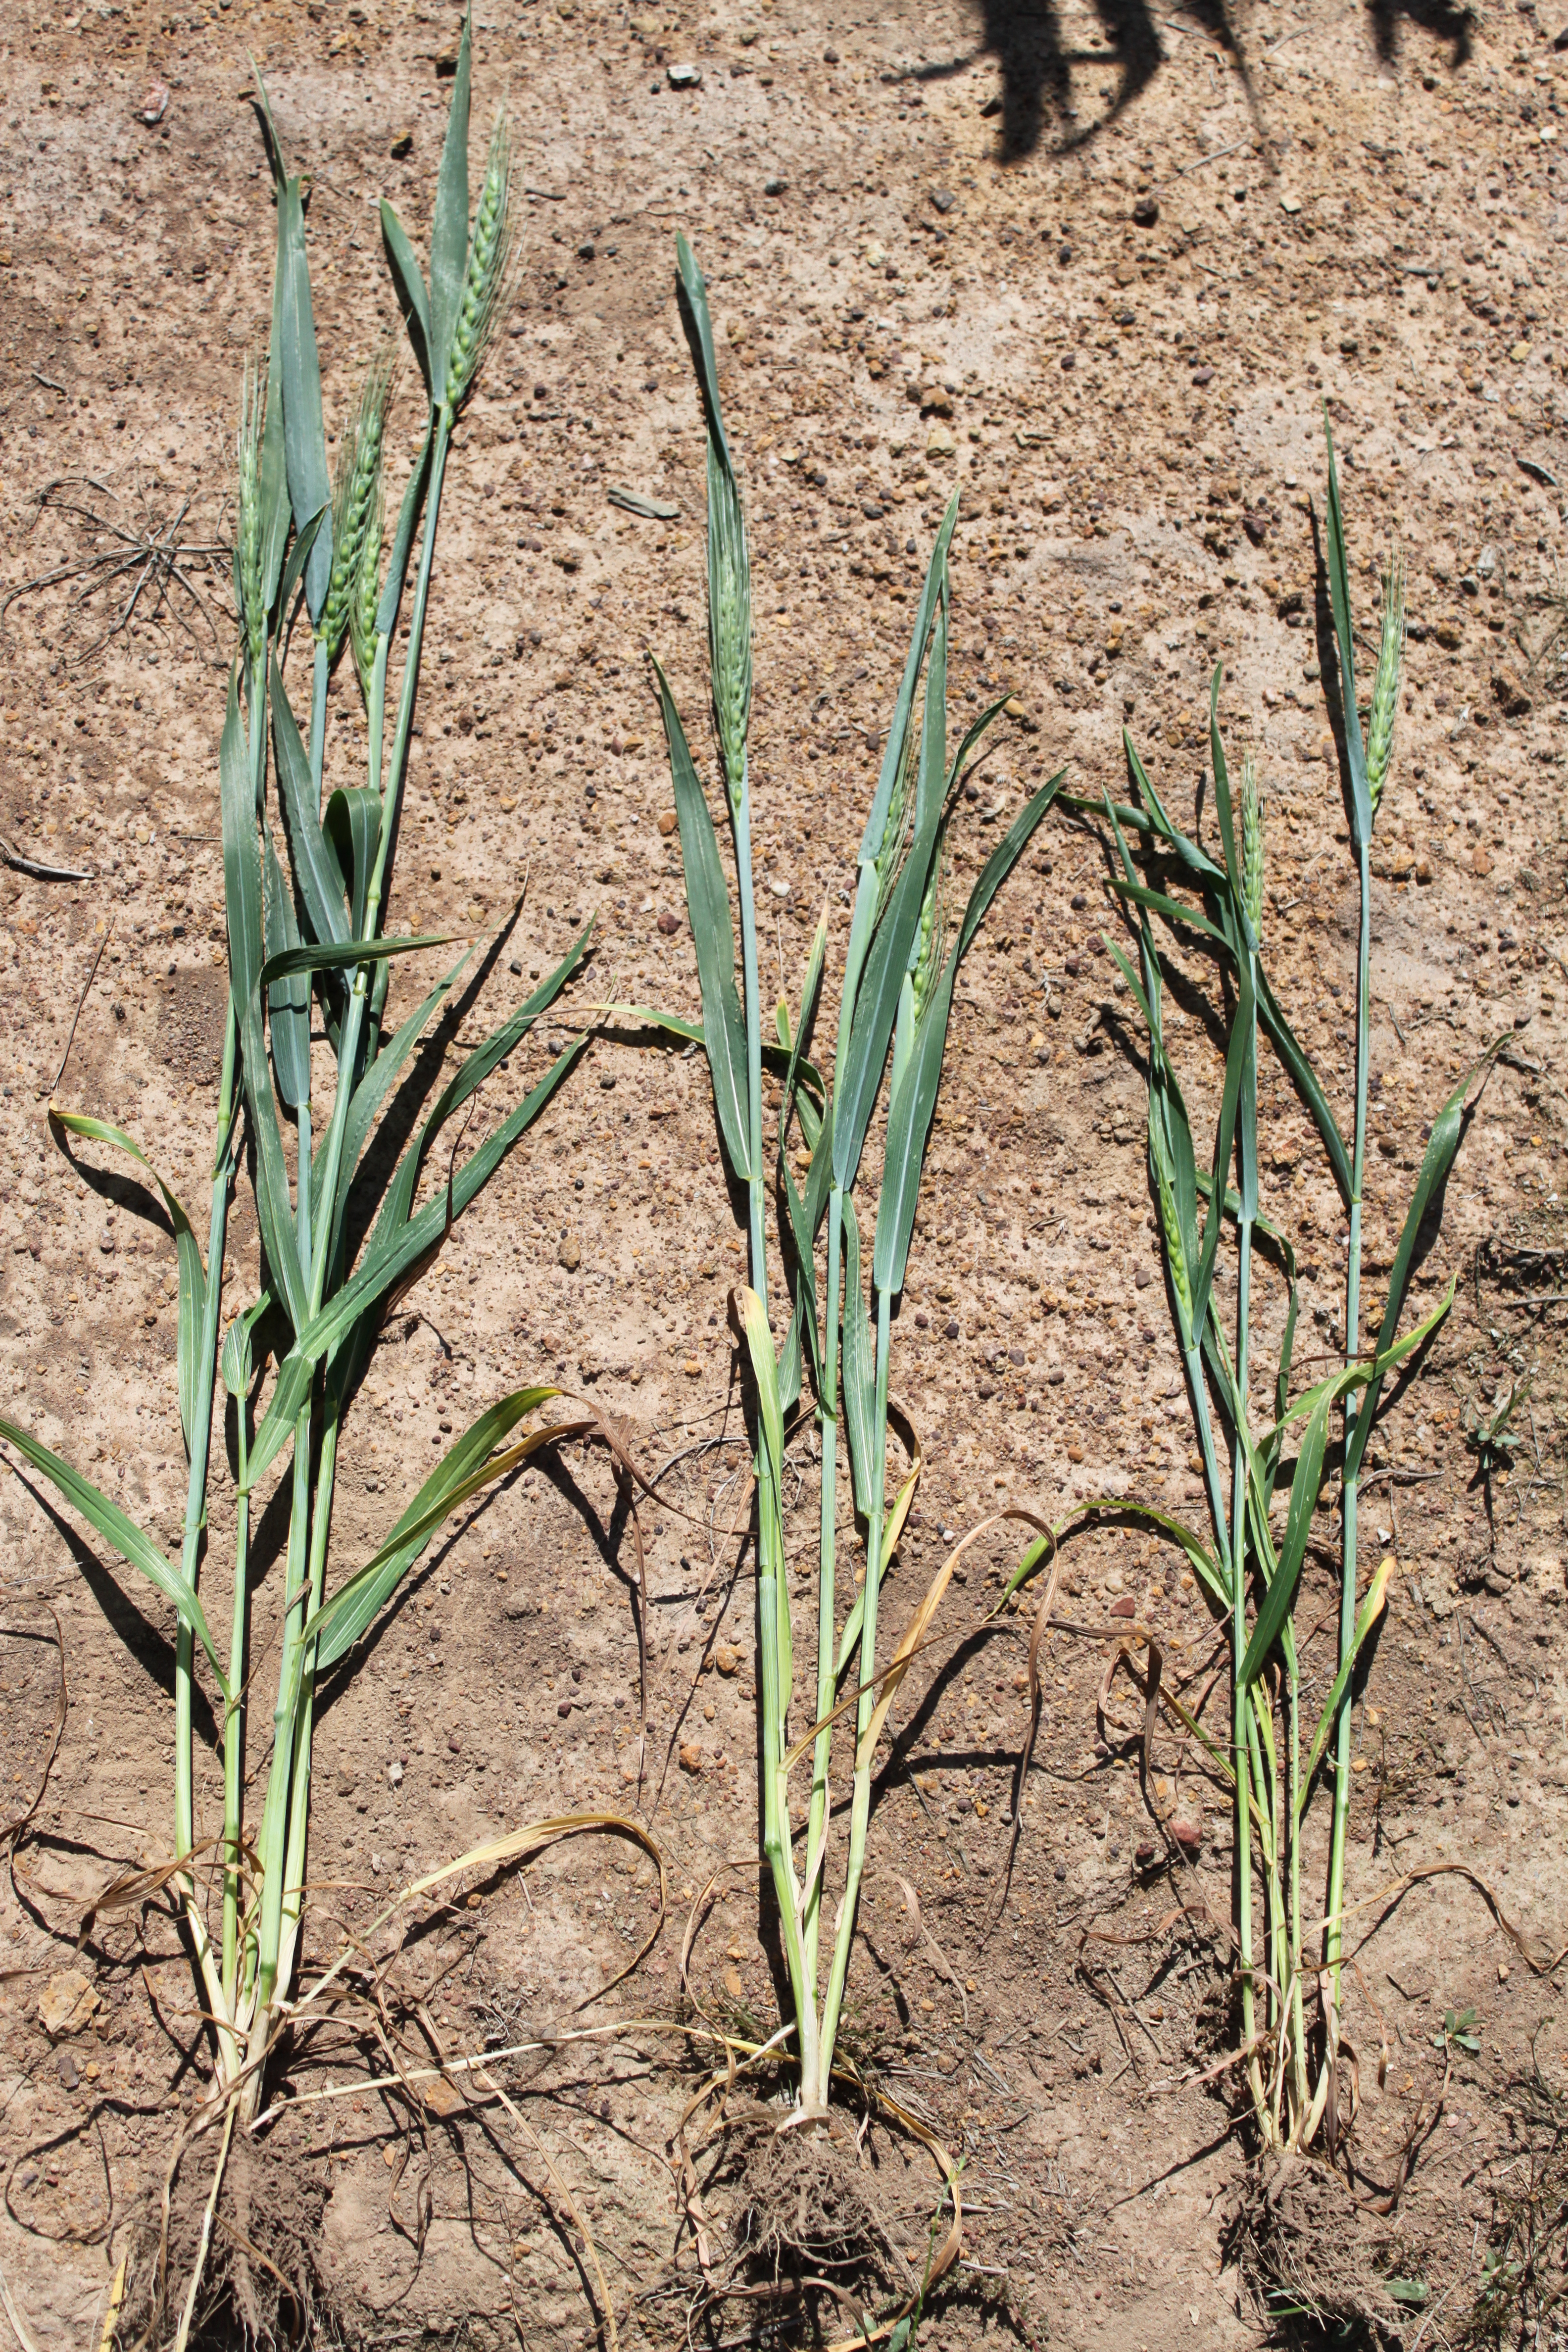 Winter wheats have an in-built cold requirement that stops them from developing to earlier - perfect for earlier sowing